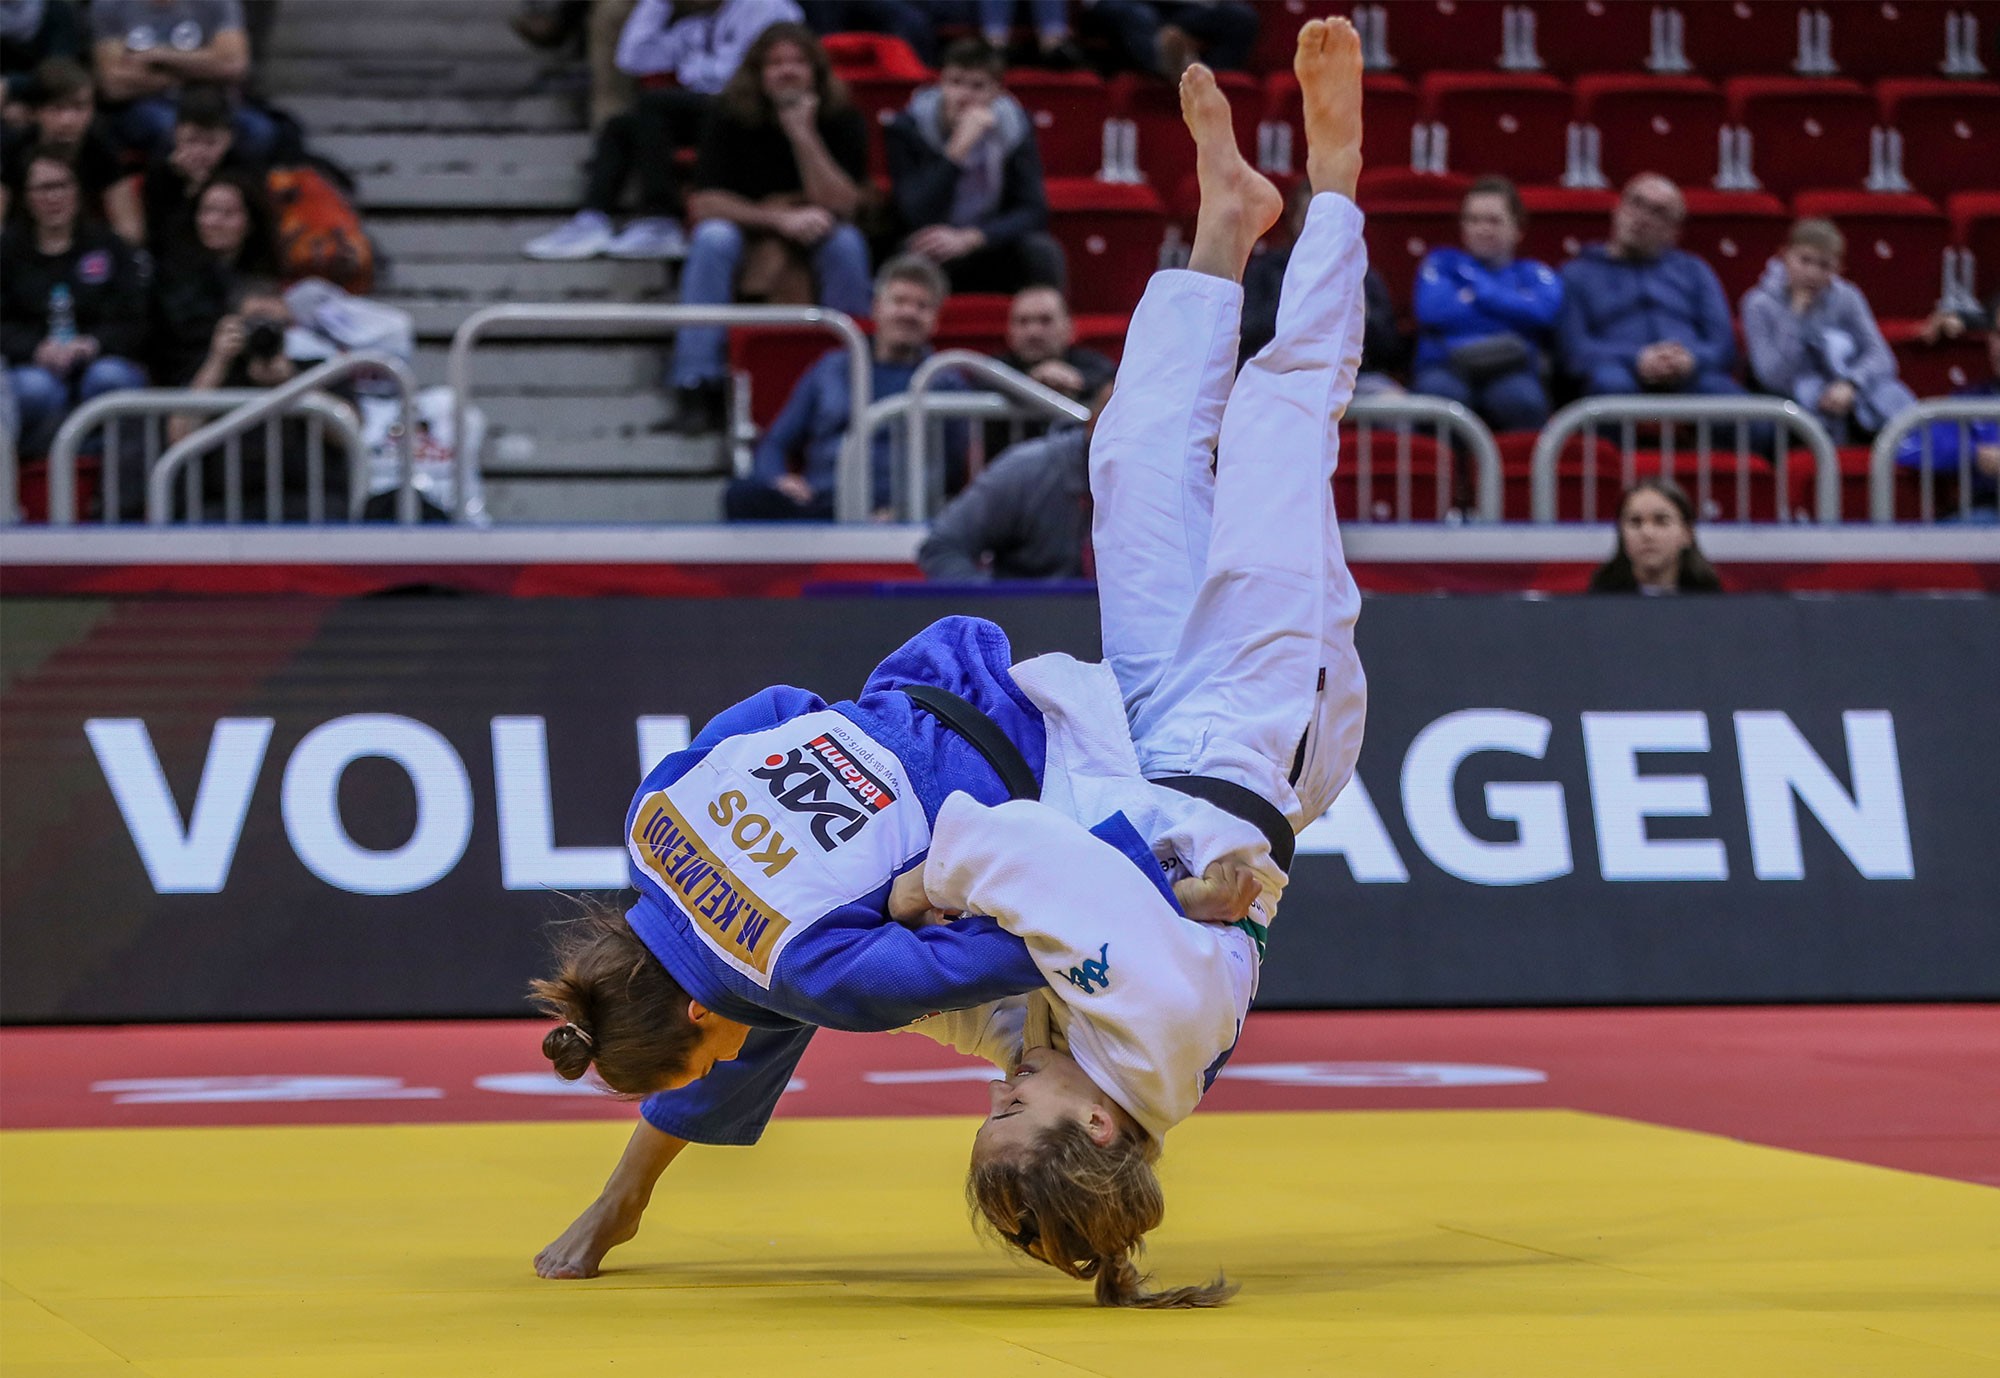 women judo competition